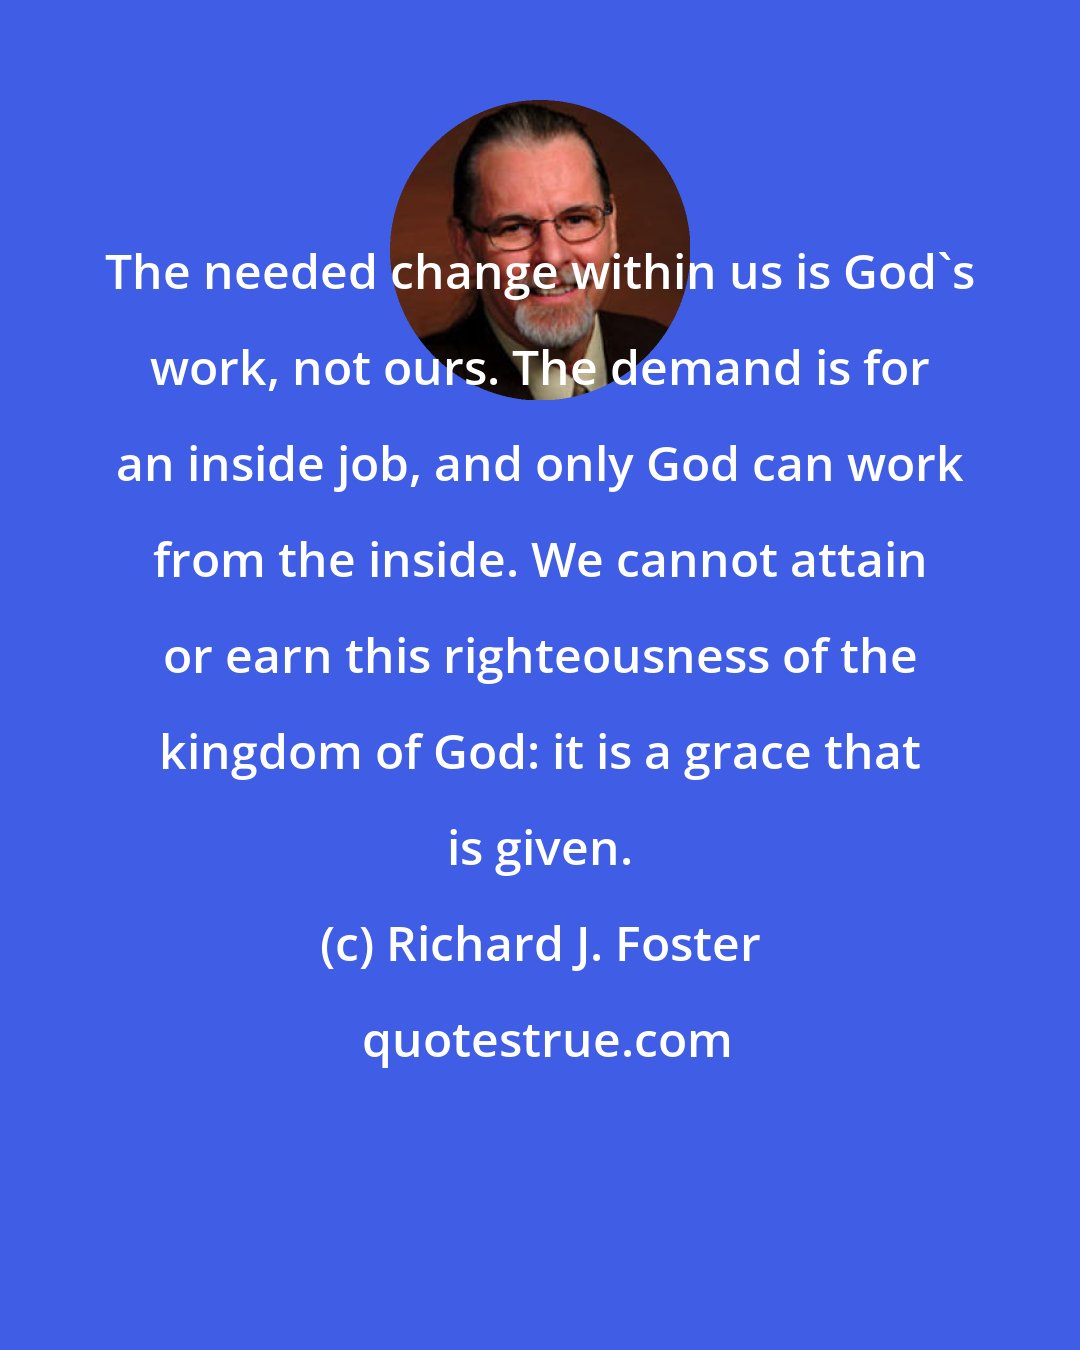 Richard J. Foster: The needed change within us is God's work, not ours. The demand is for an inside job, and only God can work from the inside. We cannot attain or earn this righteousness of the kingdom of God: it is a grace that is given.